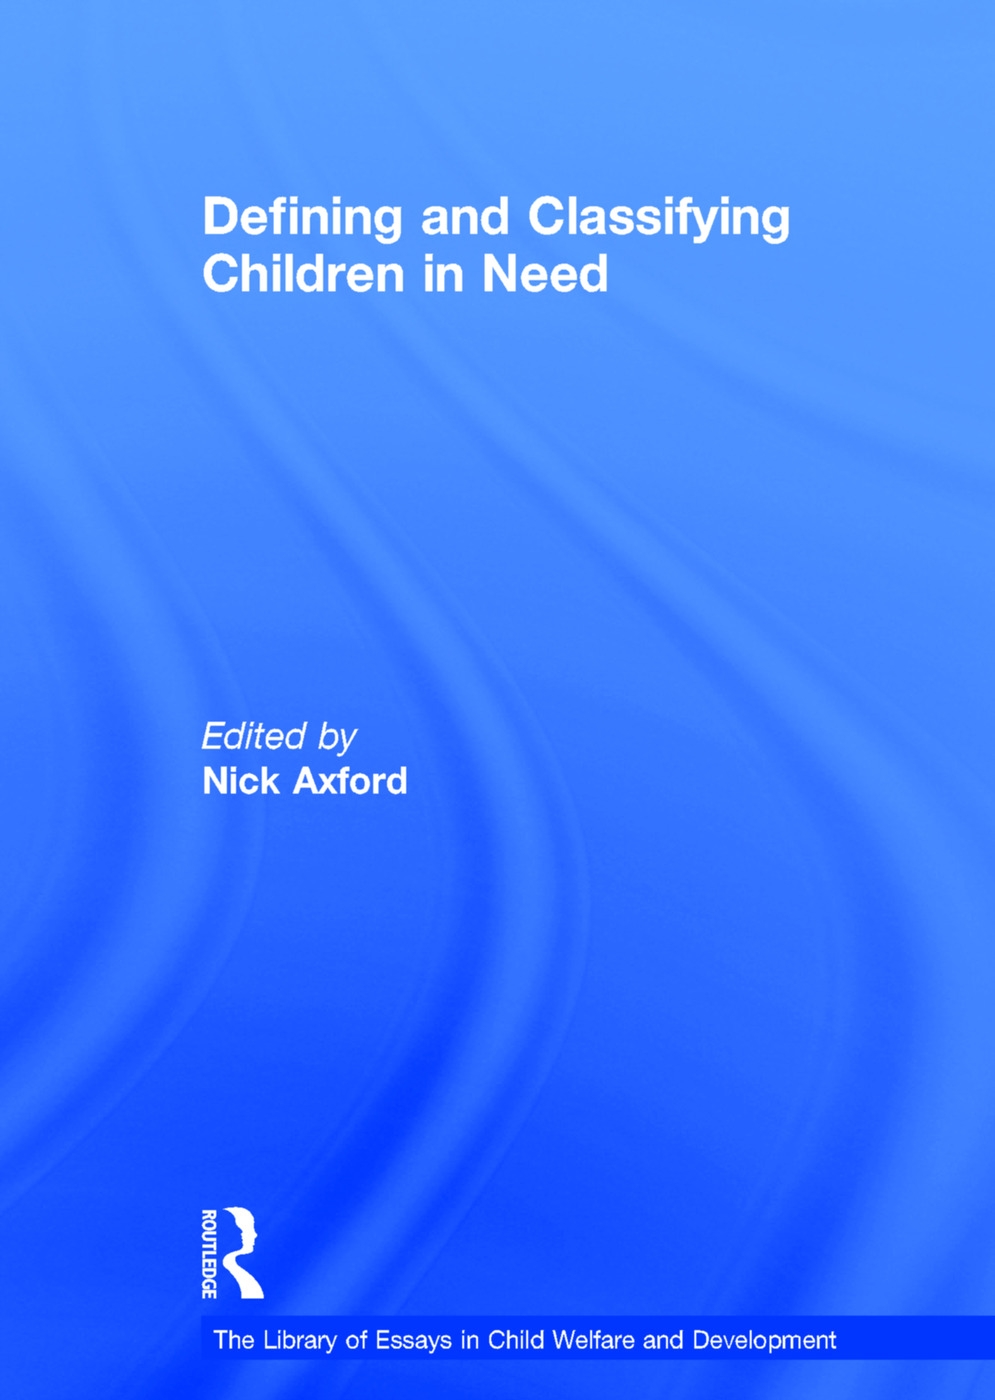 Defining and Classifying Children in Need. Edited by Nick Axford